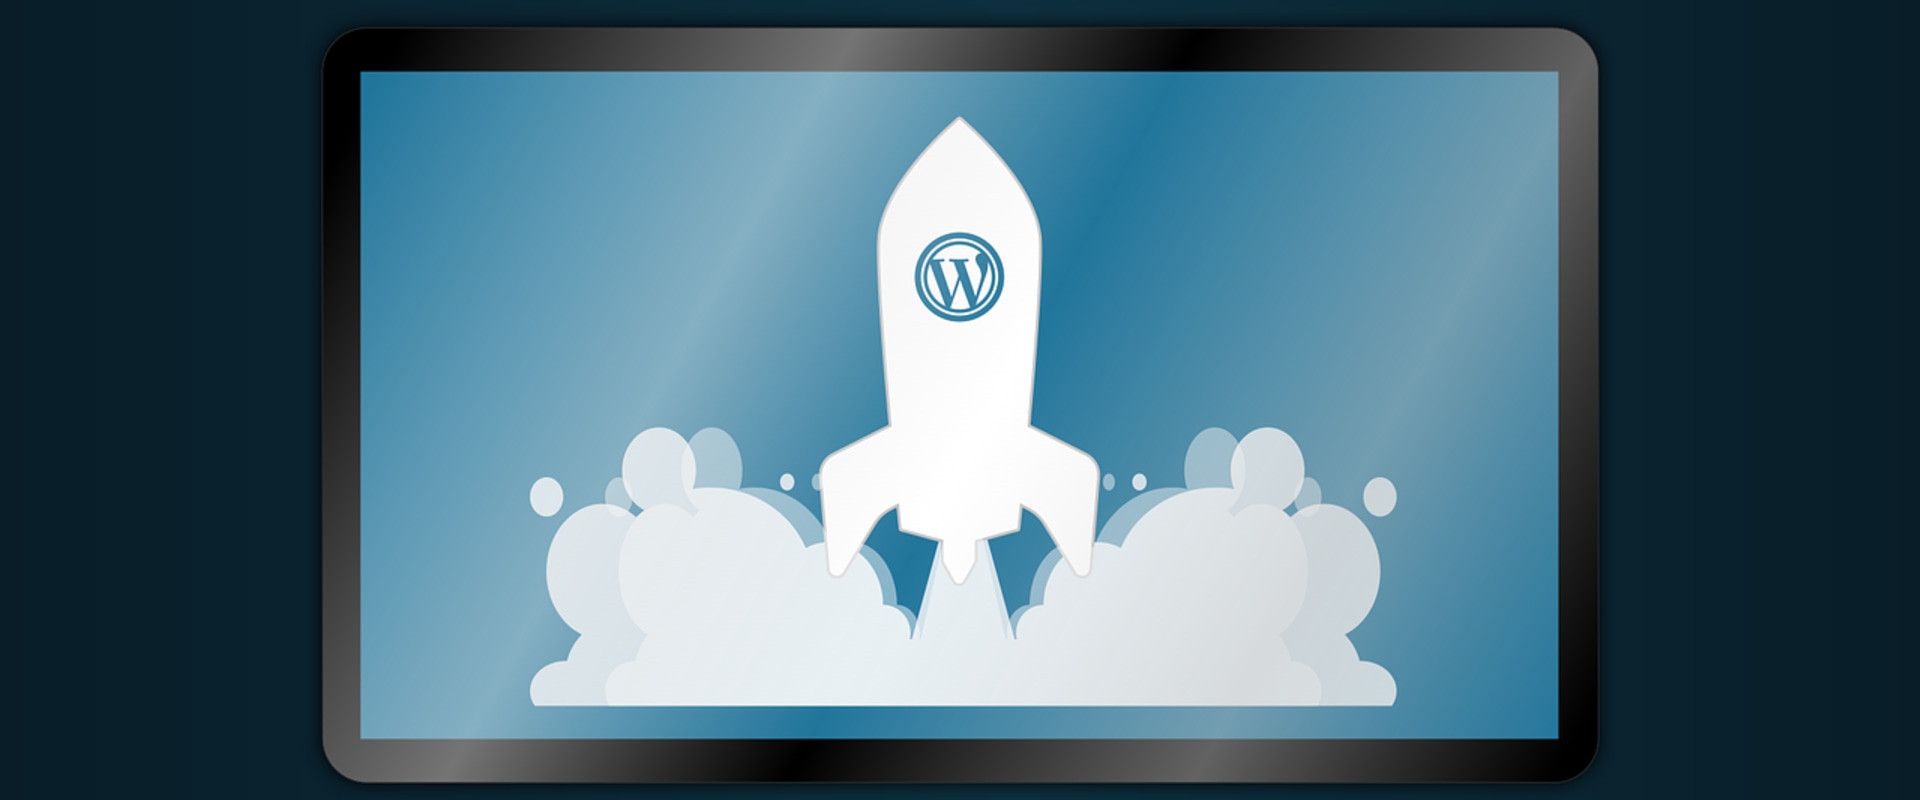 The Essential WordPress Plugins You Need to Know About